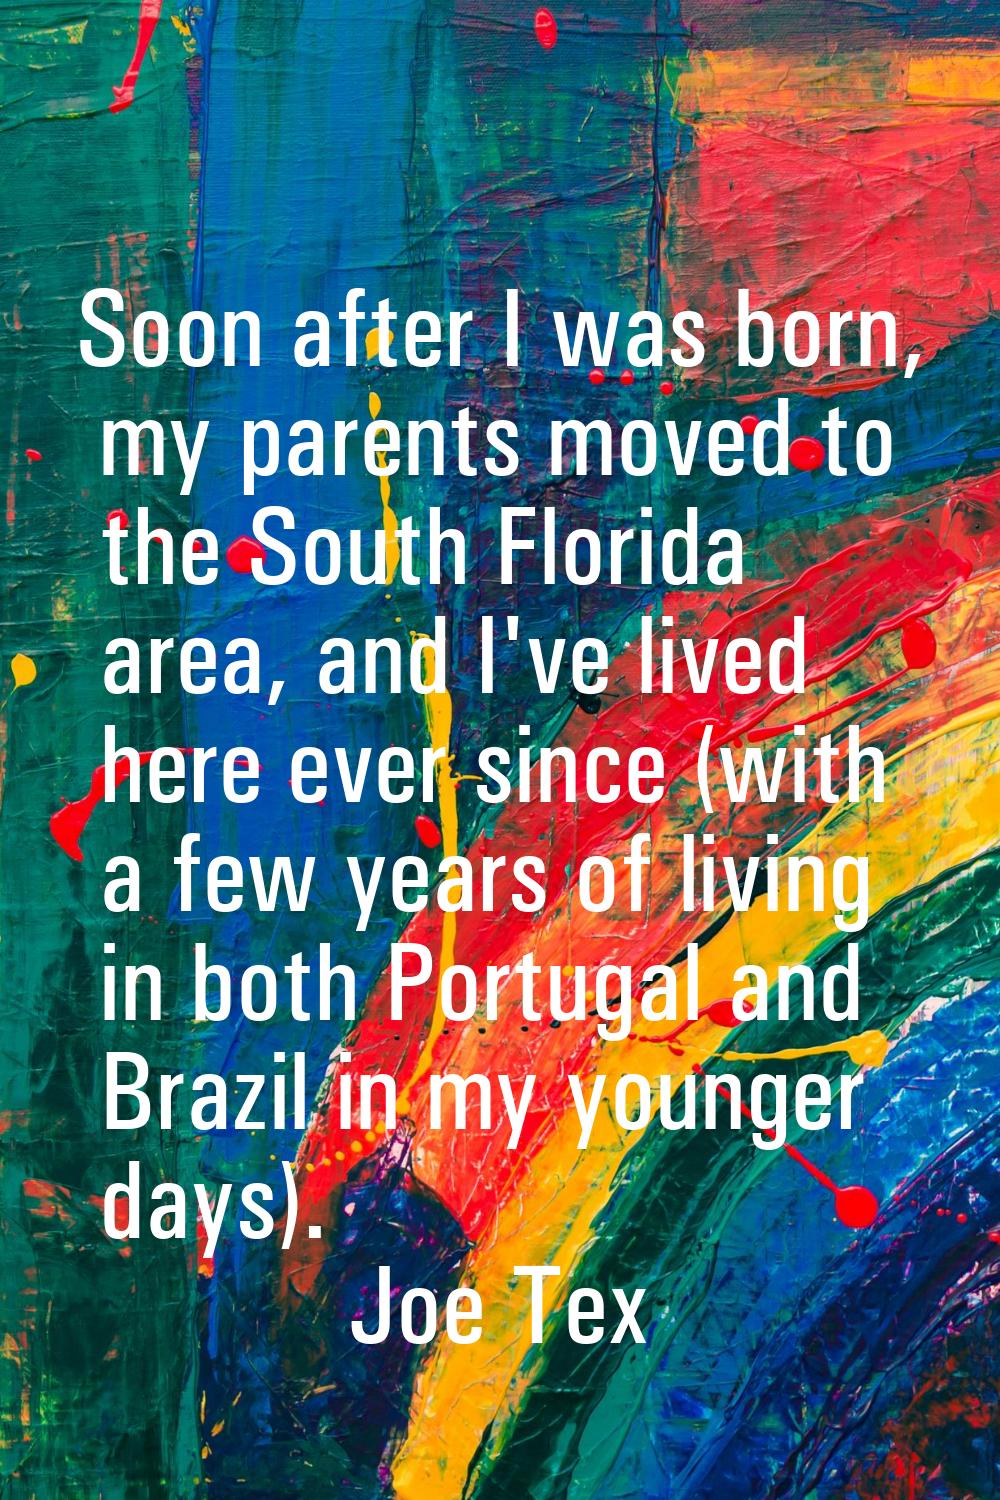 Soon after I was born, my parents moved to the South Florida area, and I've lived here ever since (